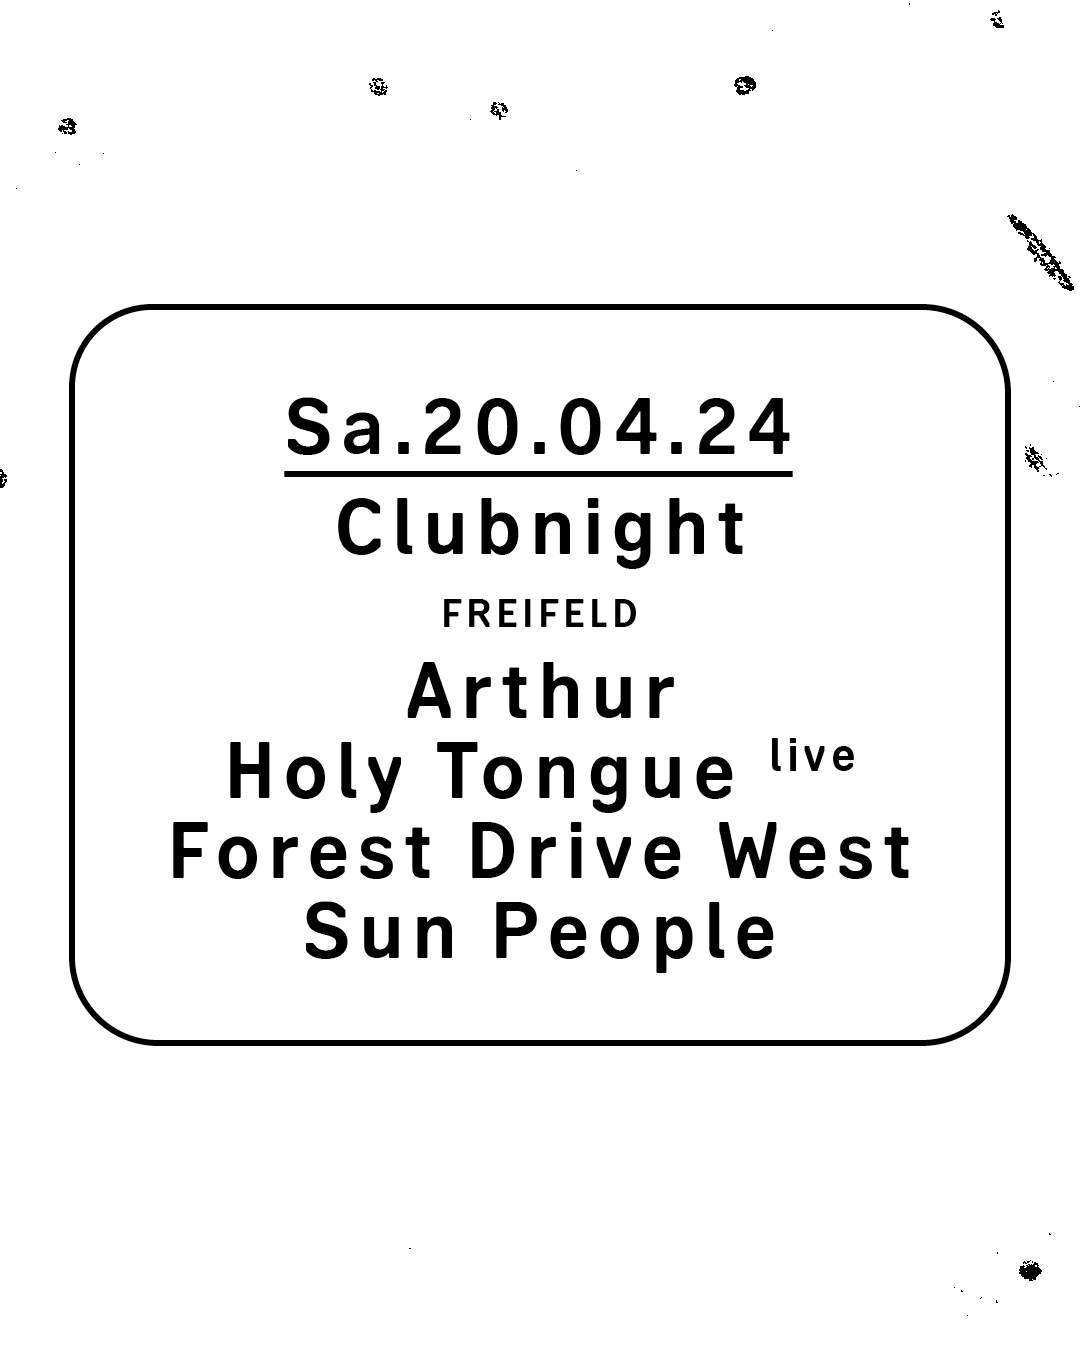 Clubnight - Arthur, Holy Tongue, Forest Drive West, Sun People - フライヤー裏